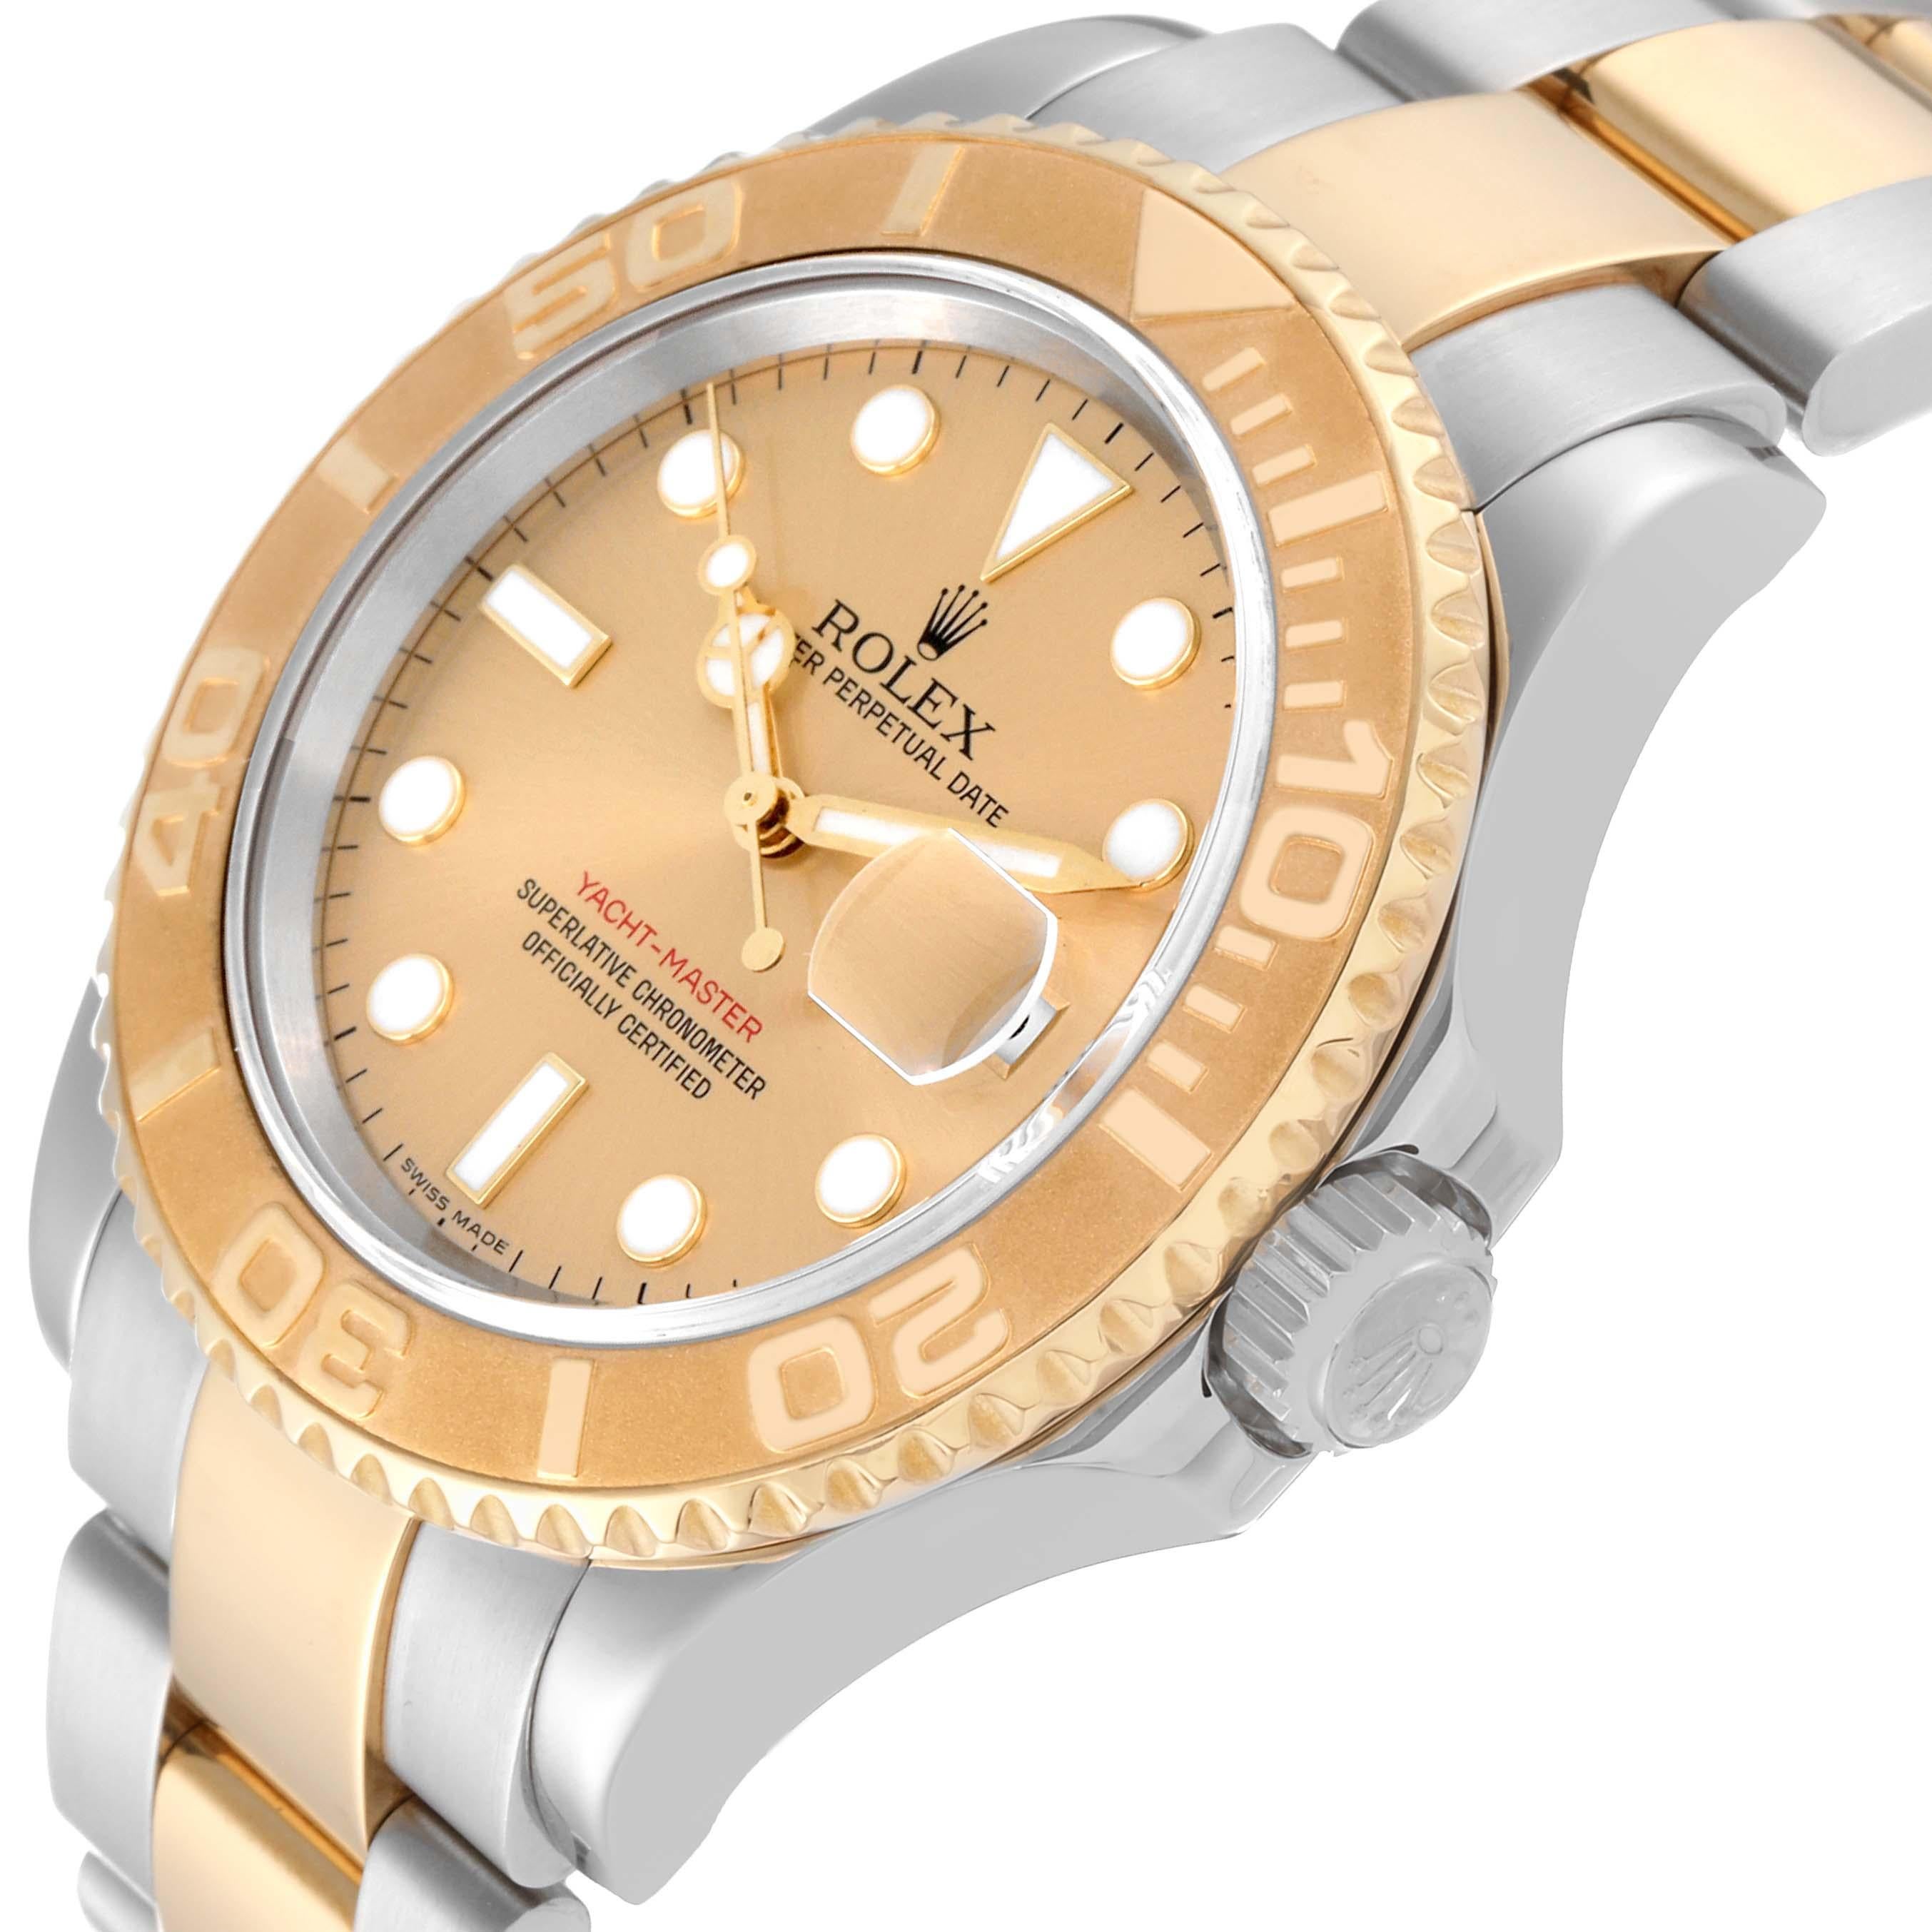 Men's Rolex Yachtmaster Steel Yellow Gold Champagne Dial Mens Watch 16623